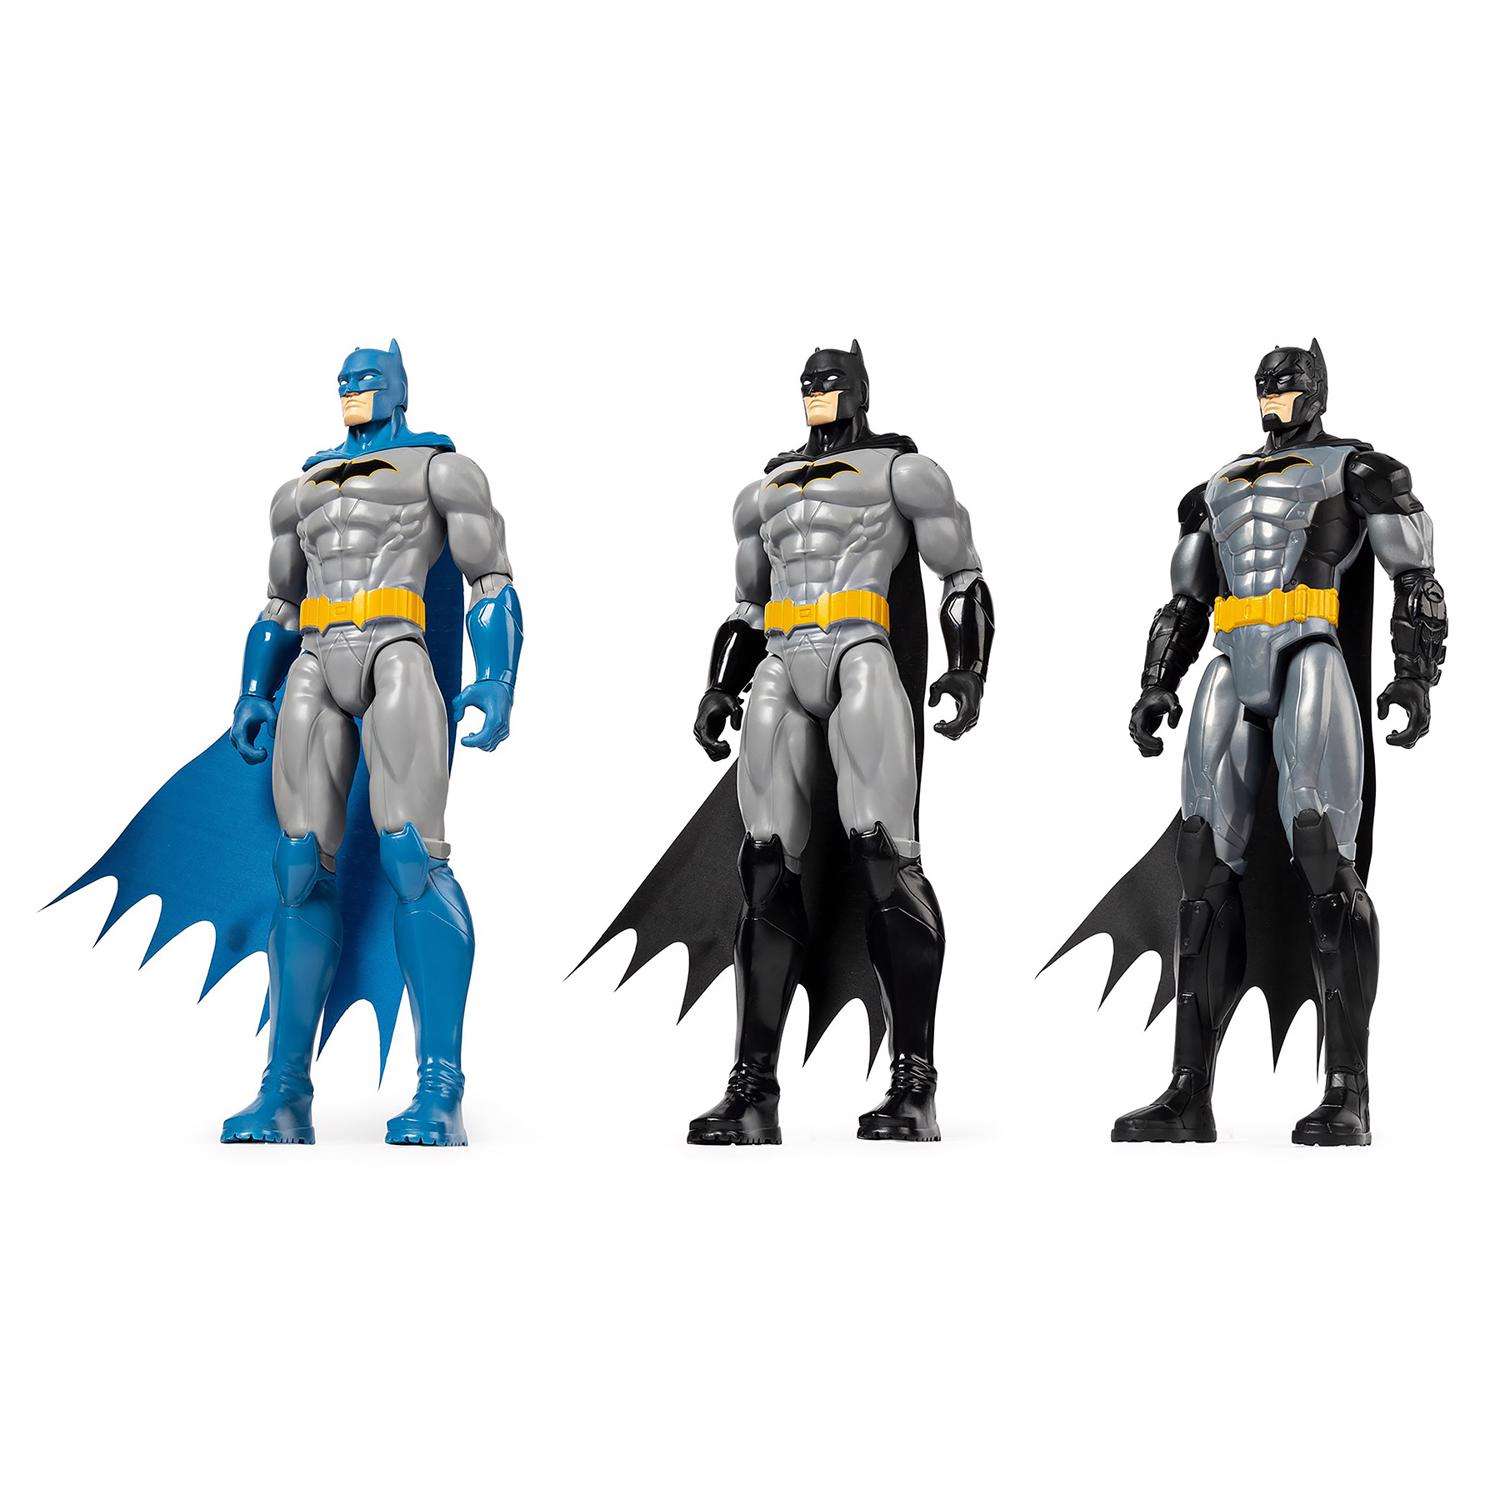 Spin Master Batman toy review - A worthy new entry to Batman toys